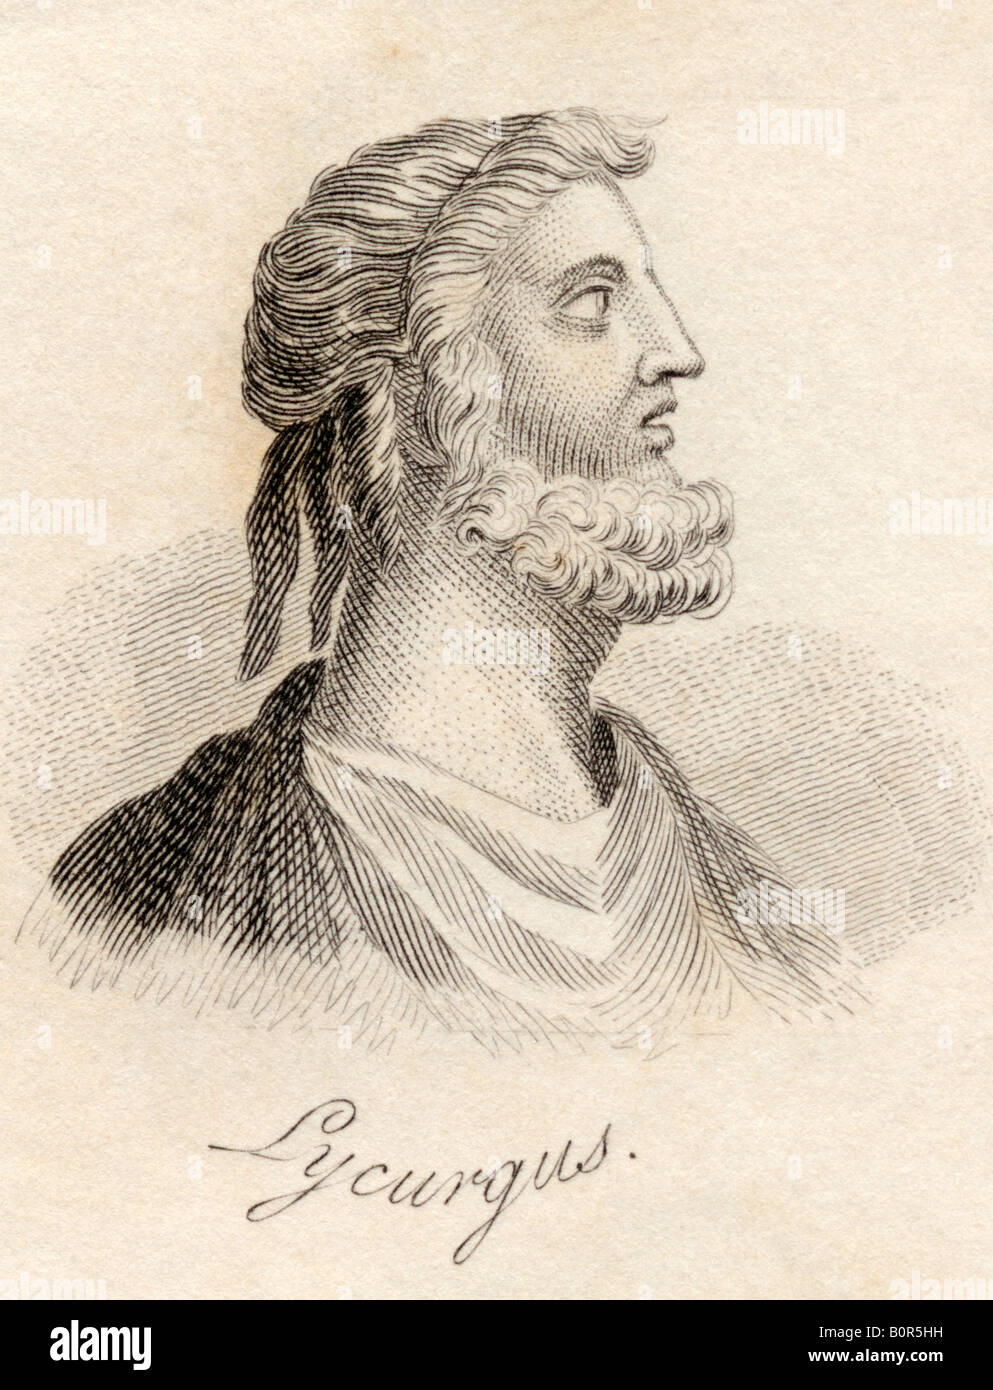 Lycurgus, c.700BC - 630BC. Legendary lawgiver of Sparta. From the book Crabbs Historical Dictionary, published 1825. Stock Photo